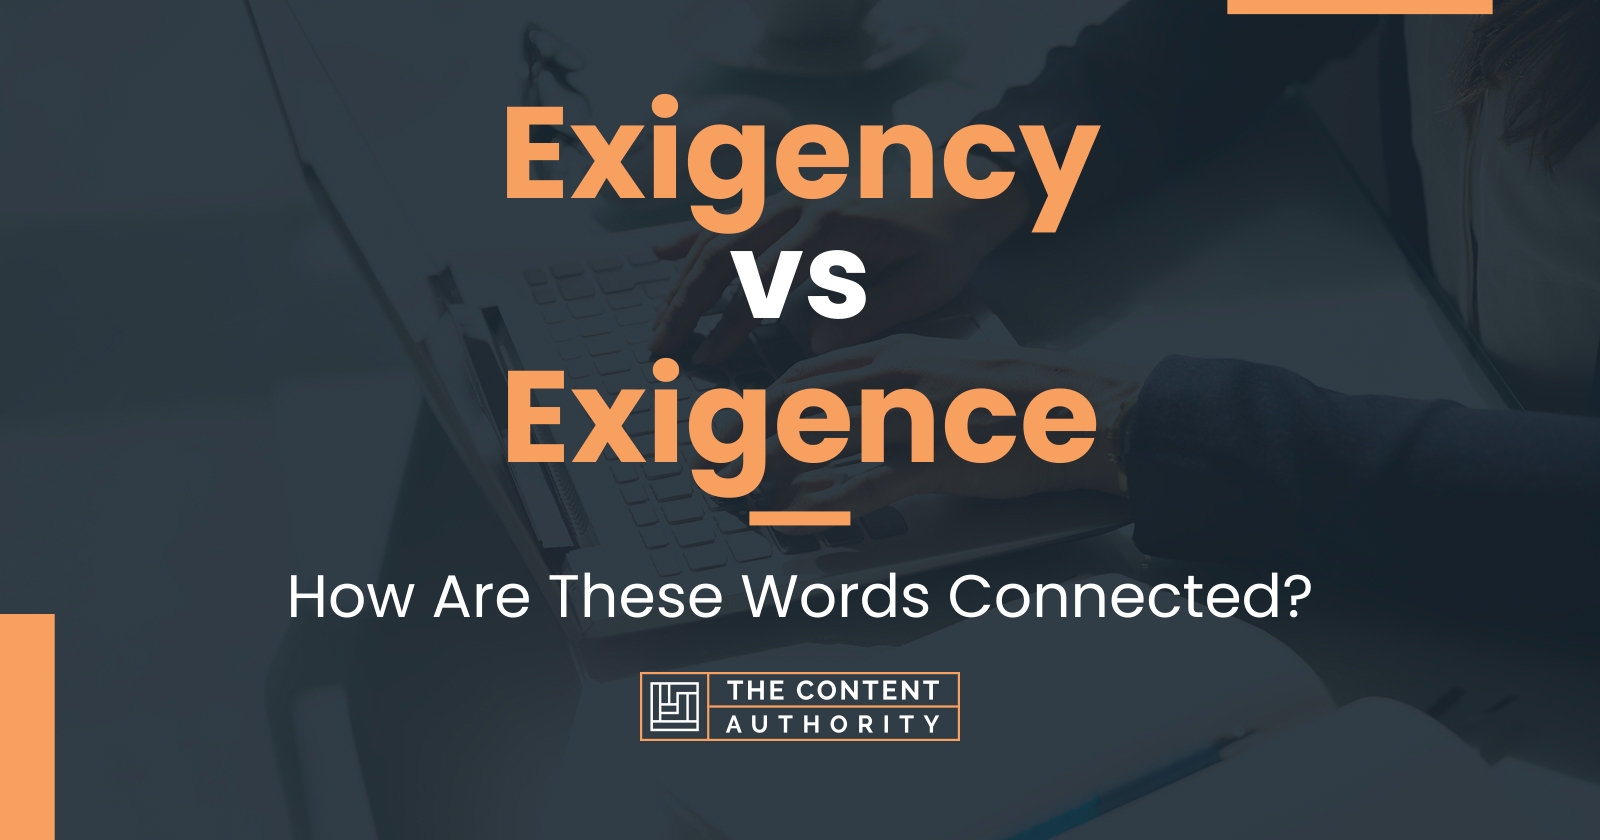 Exigency vs Exigence: How Are These Words Connected?